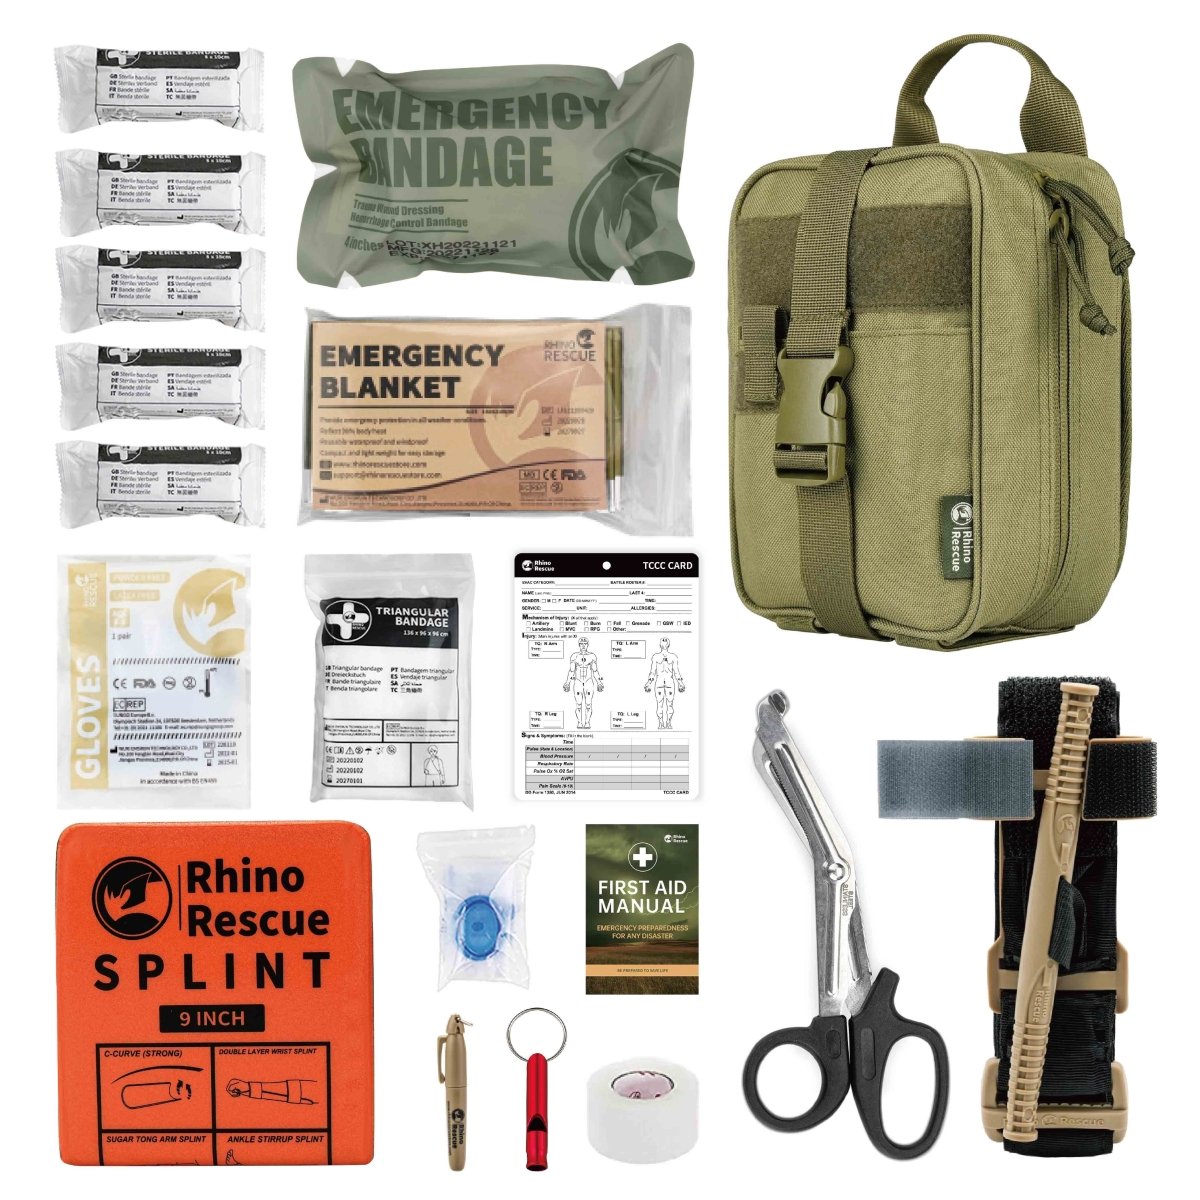 Rhino First Aid Survival Kit - Tactical IFAK Pouch with 21 Essential EMT Items